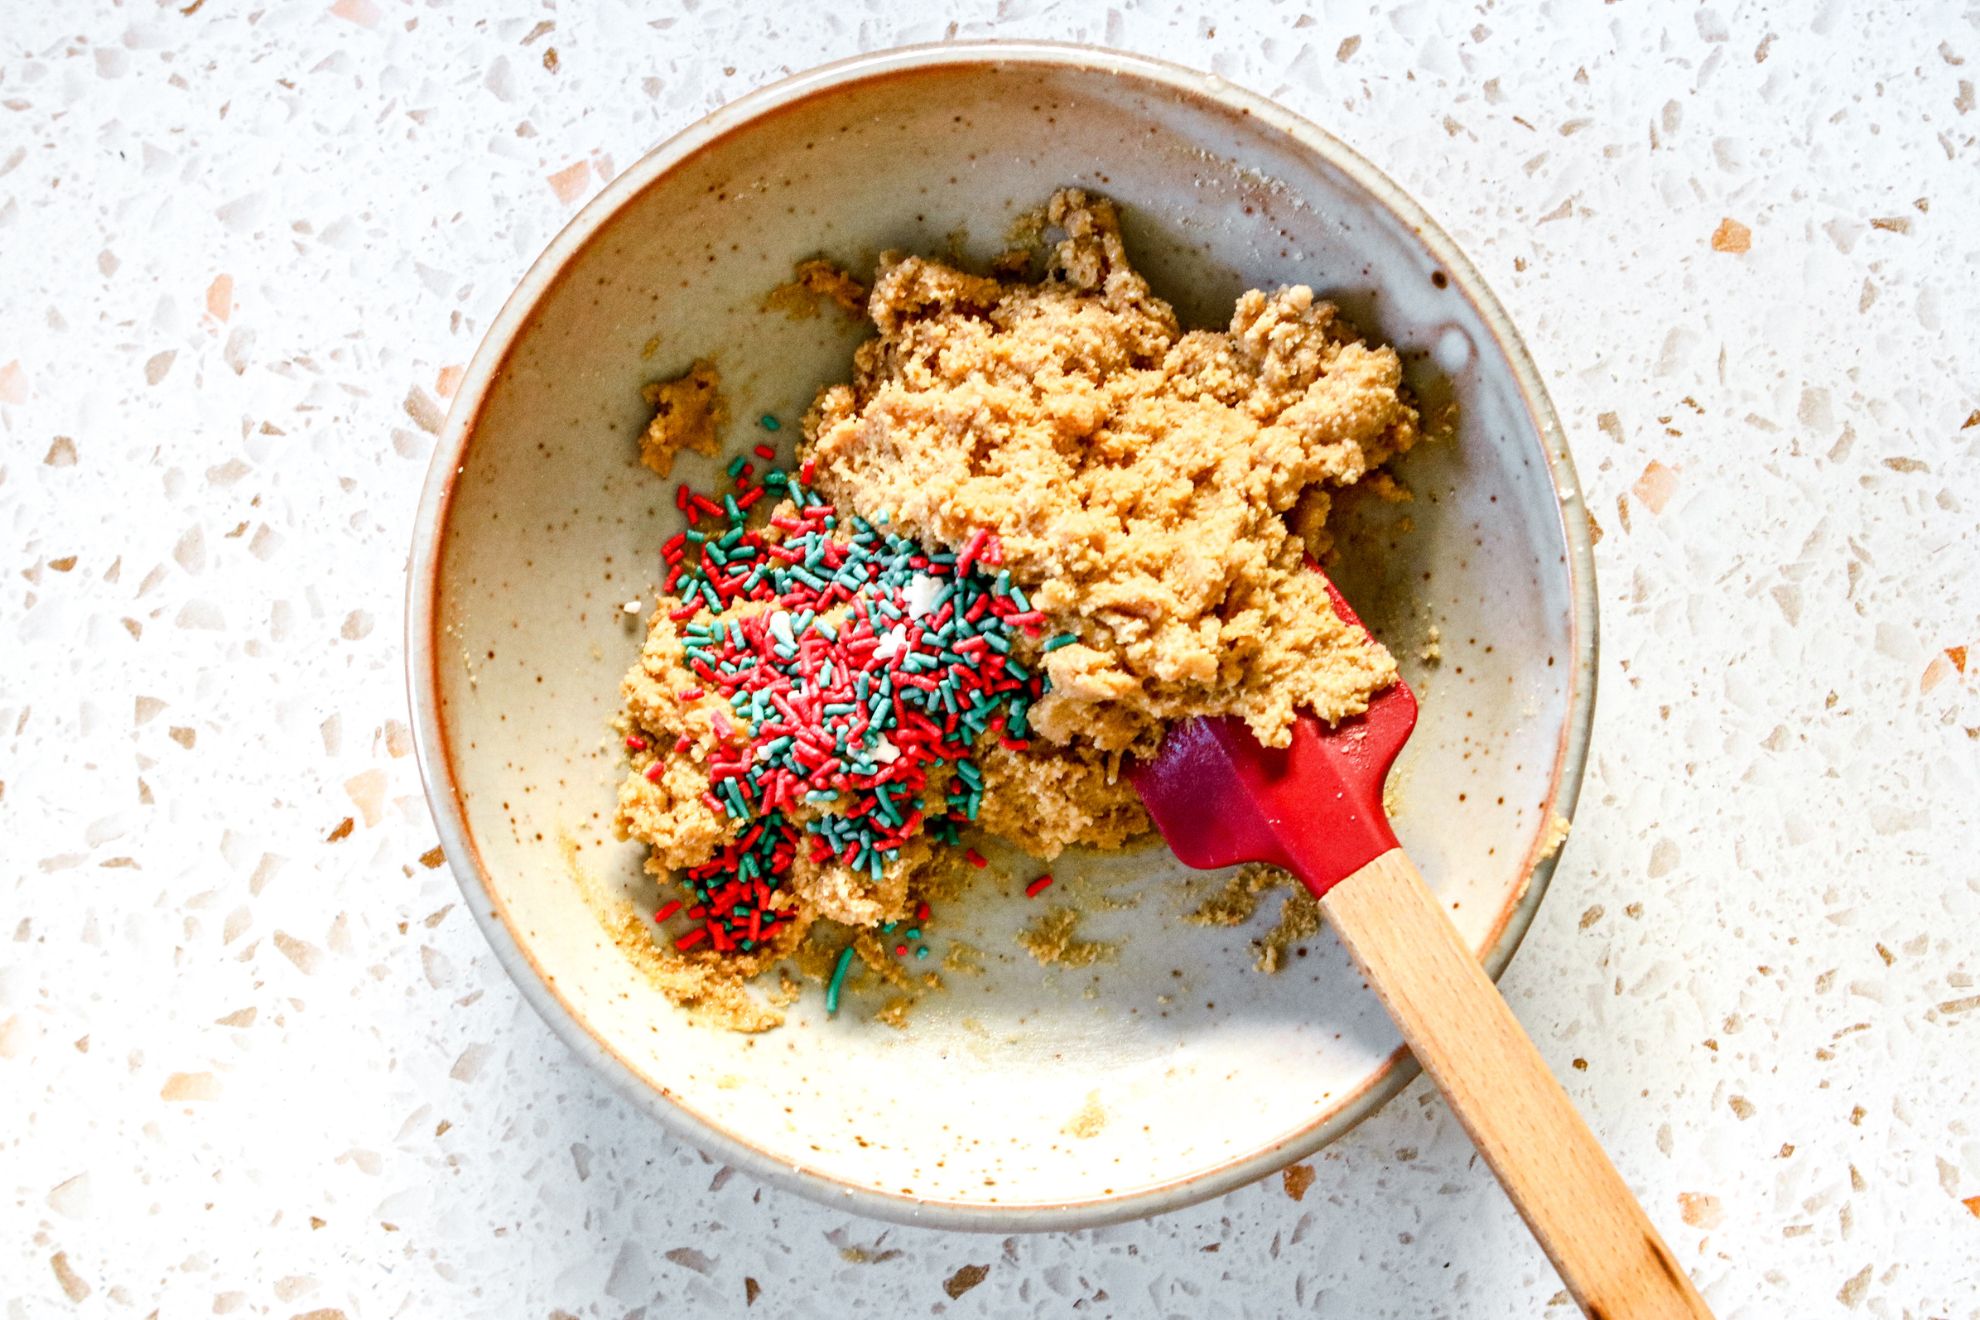 This is an overhead horizontal image of a bowl on a terrazzo surface. In the bowl is a raw cookie dough with red and green sprinkles piled to the left. A red spatula with a wooden handle is in the bowl leaning against the side and pointing to the bottom right corner of the image.